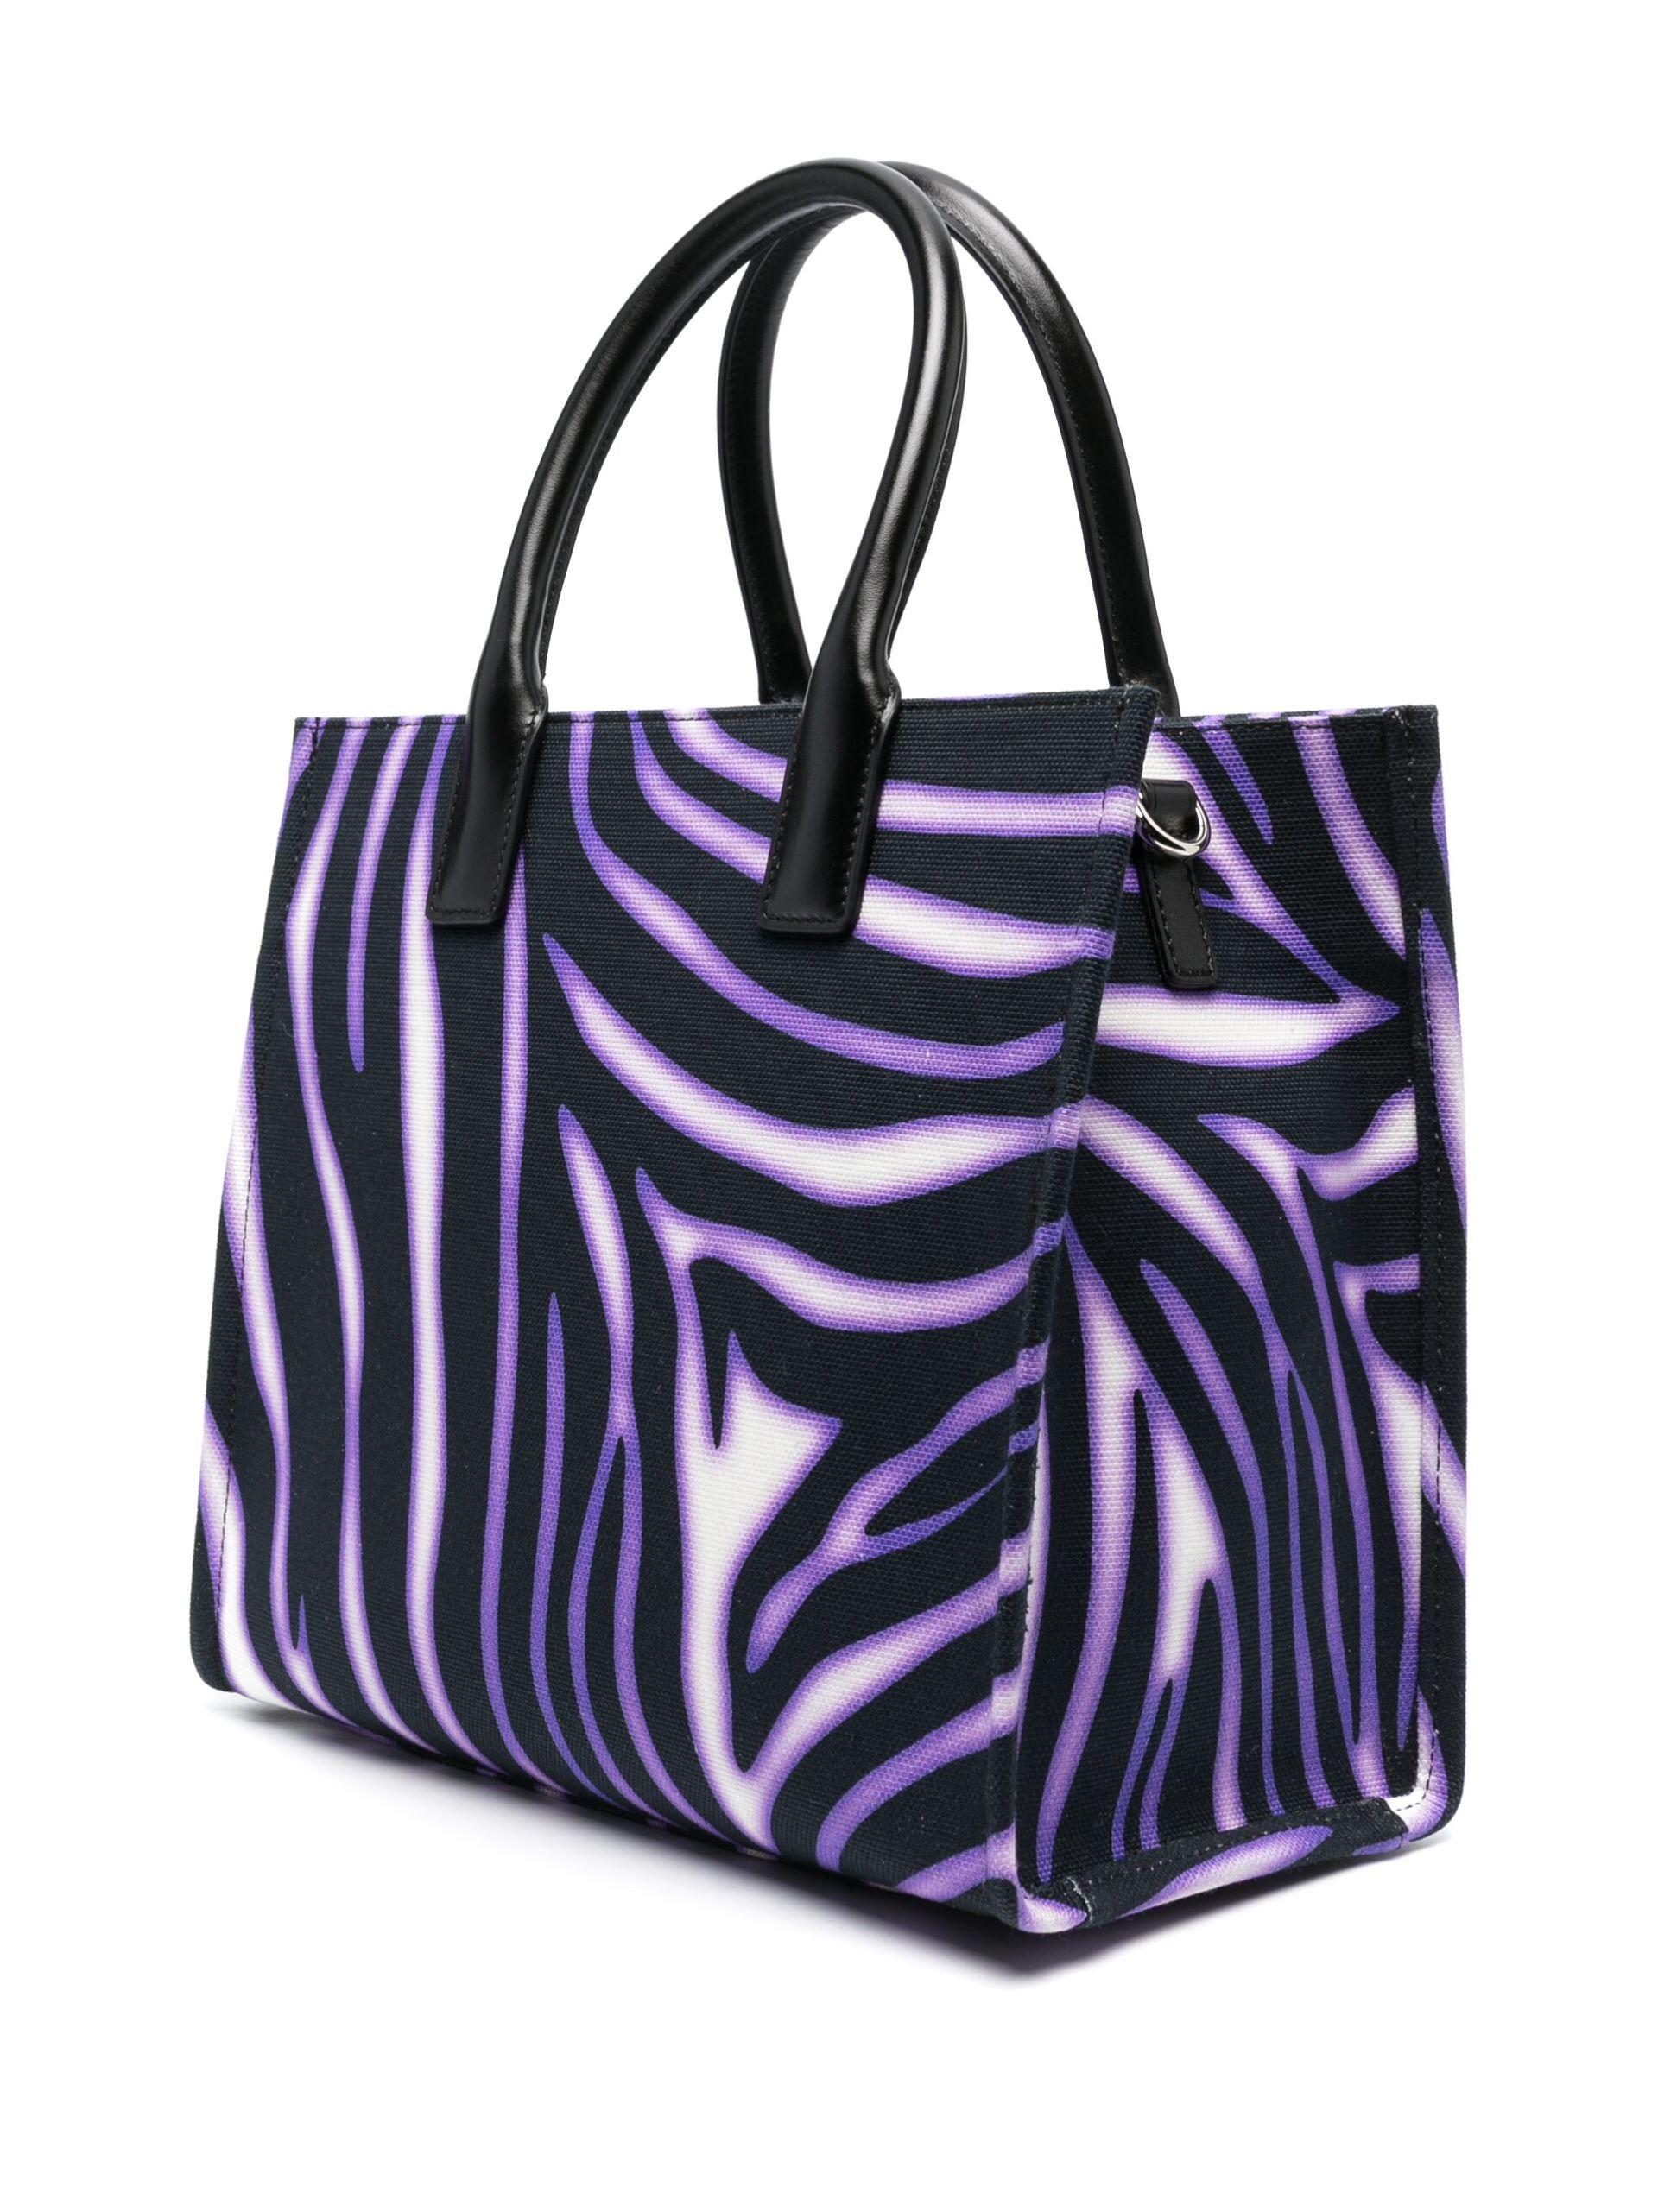 VERSACE PALAZZO LEATHER TOTE BAG in ORCHID PINK For Sale at 1stDibs